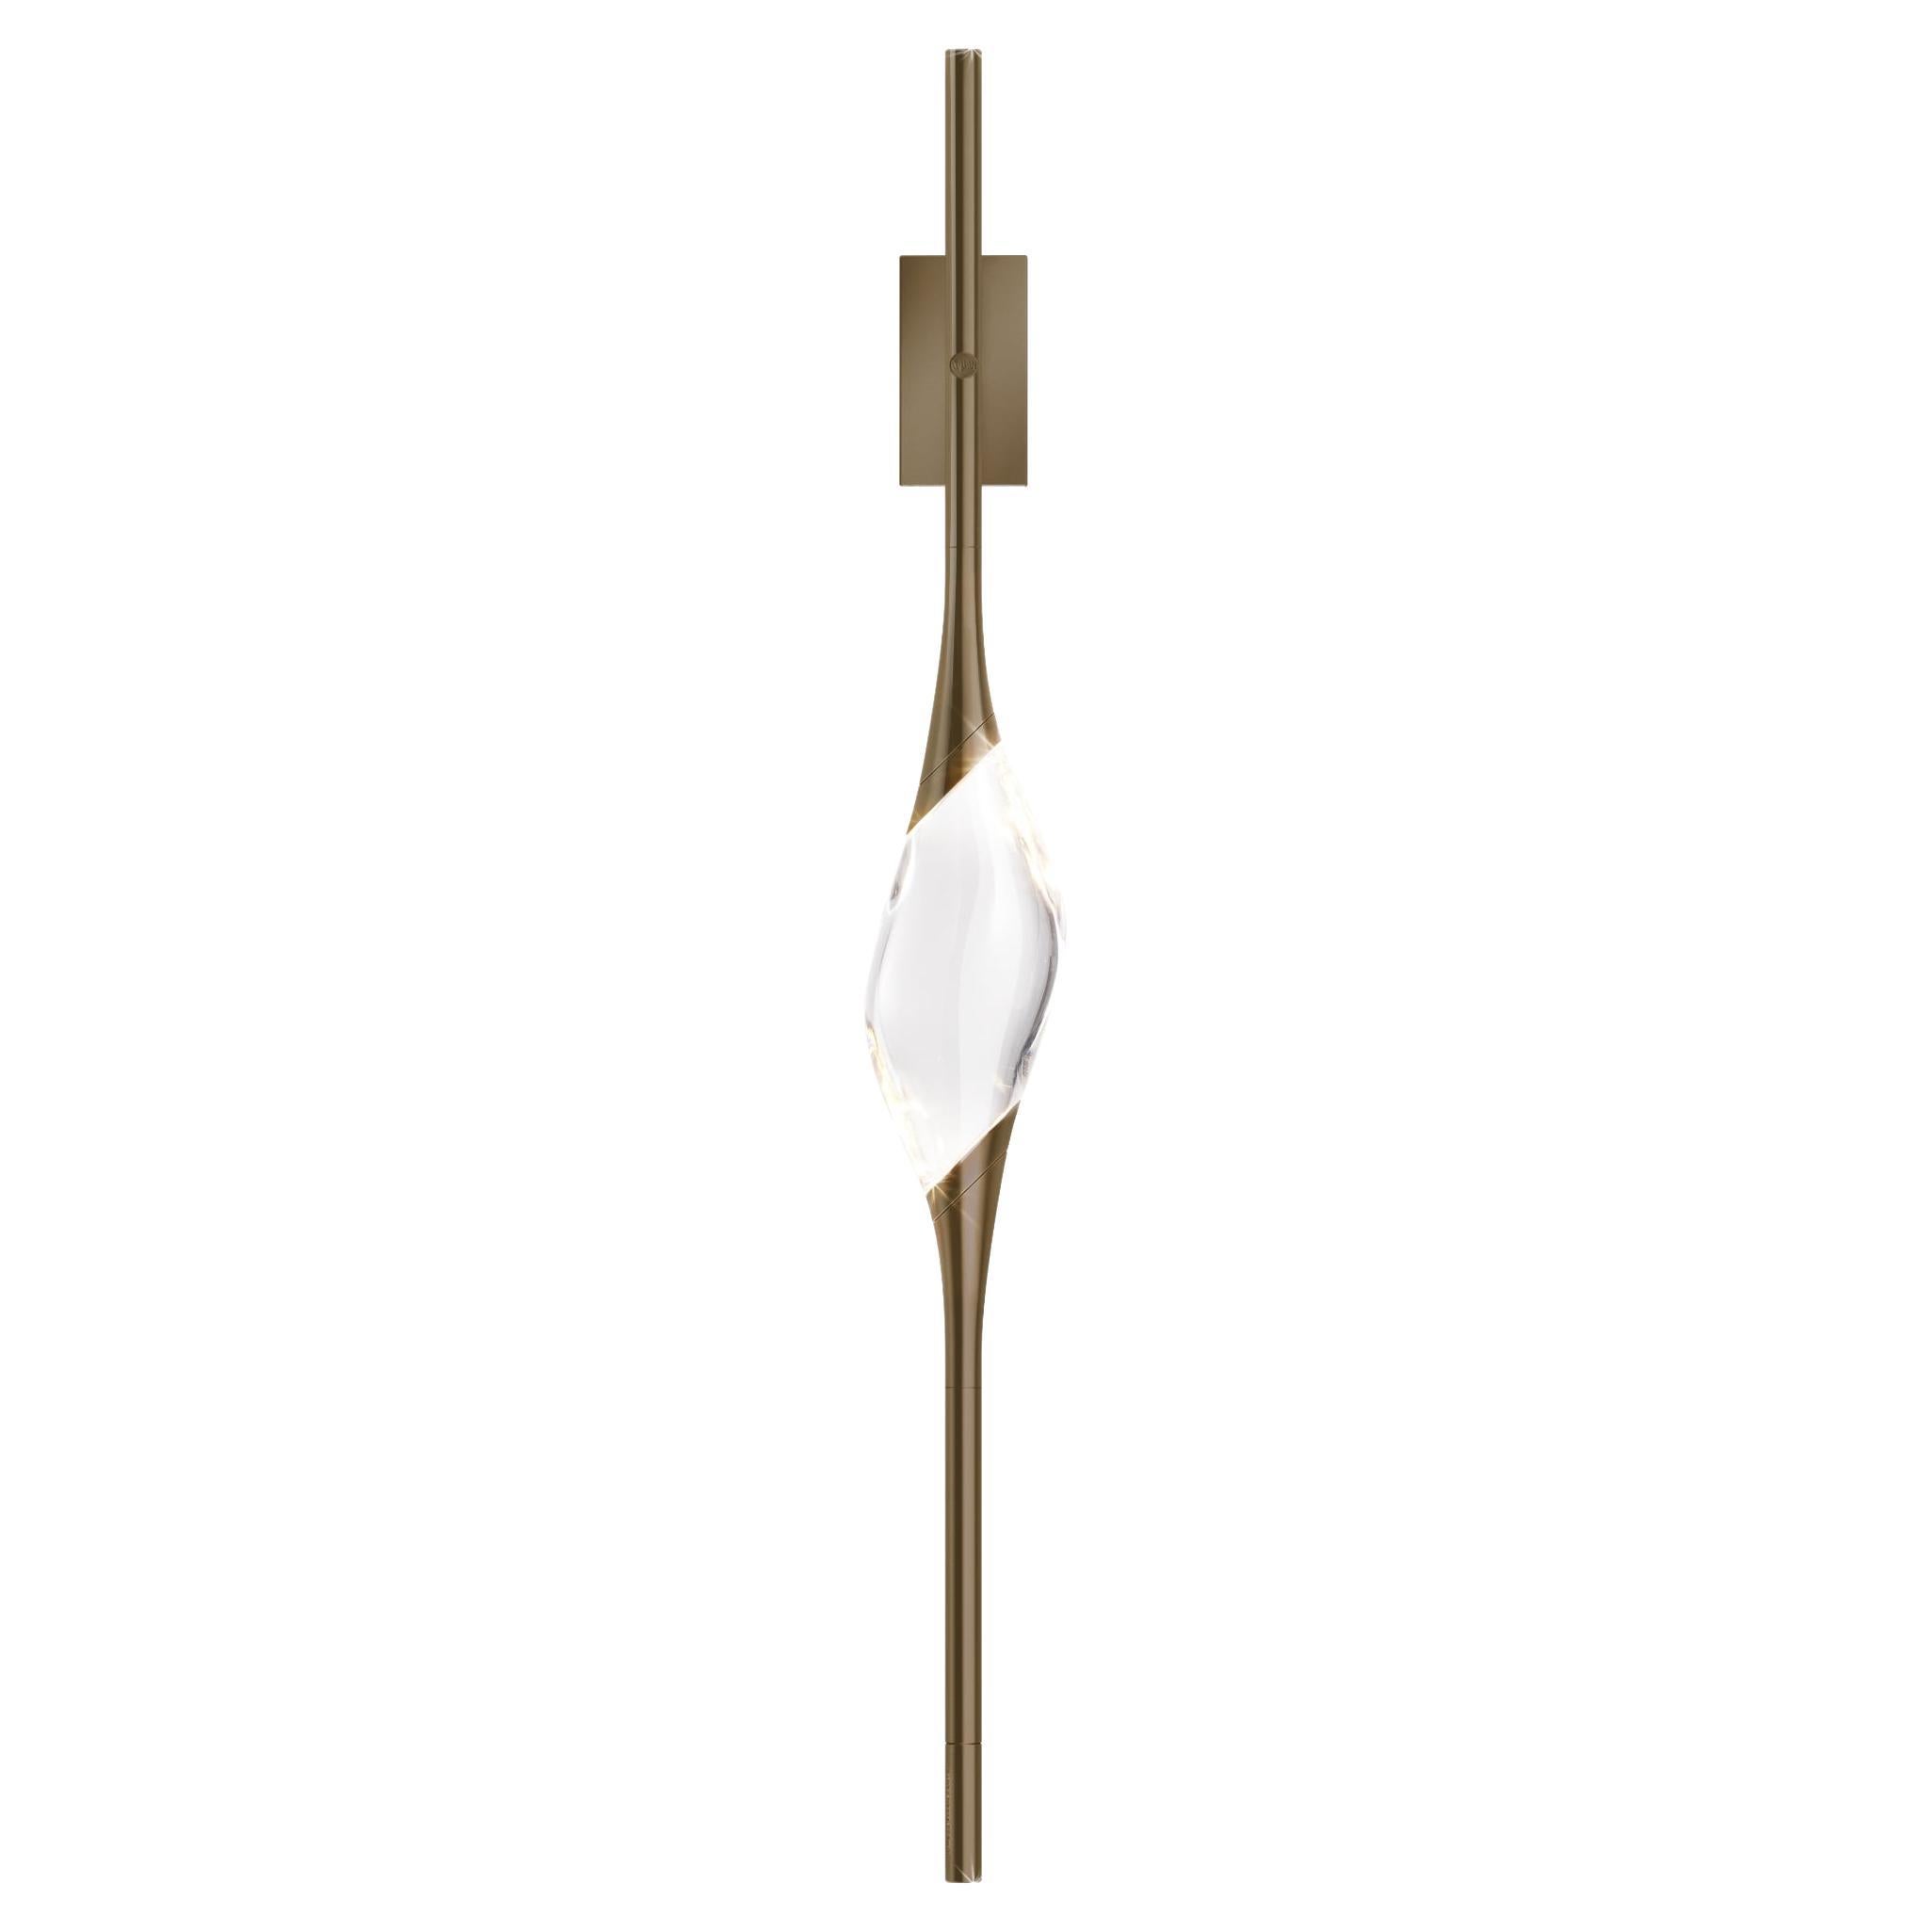 "Il Pezzo 12 Wall Sconce" - bronze - crystal - LEDs - Made in Italy